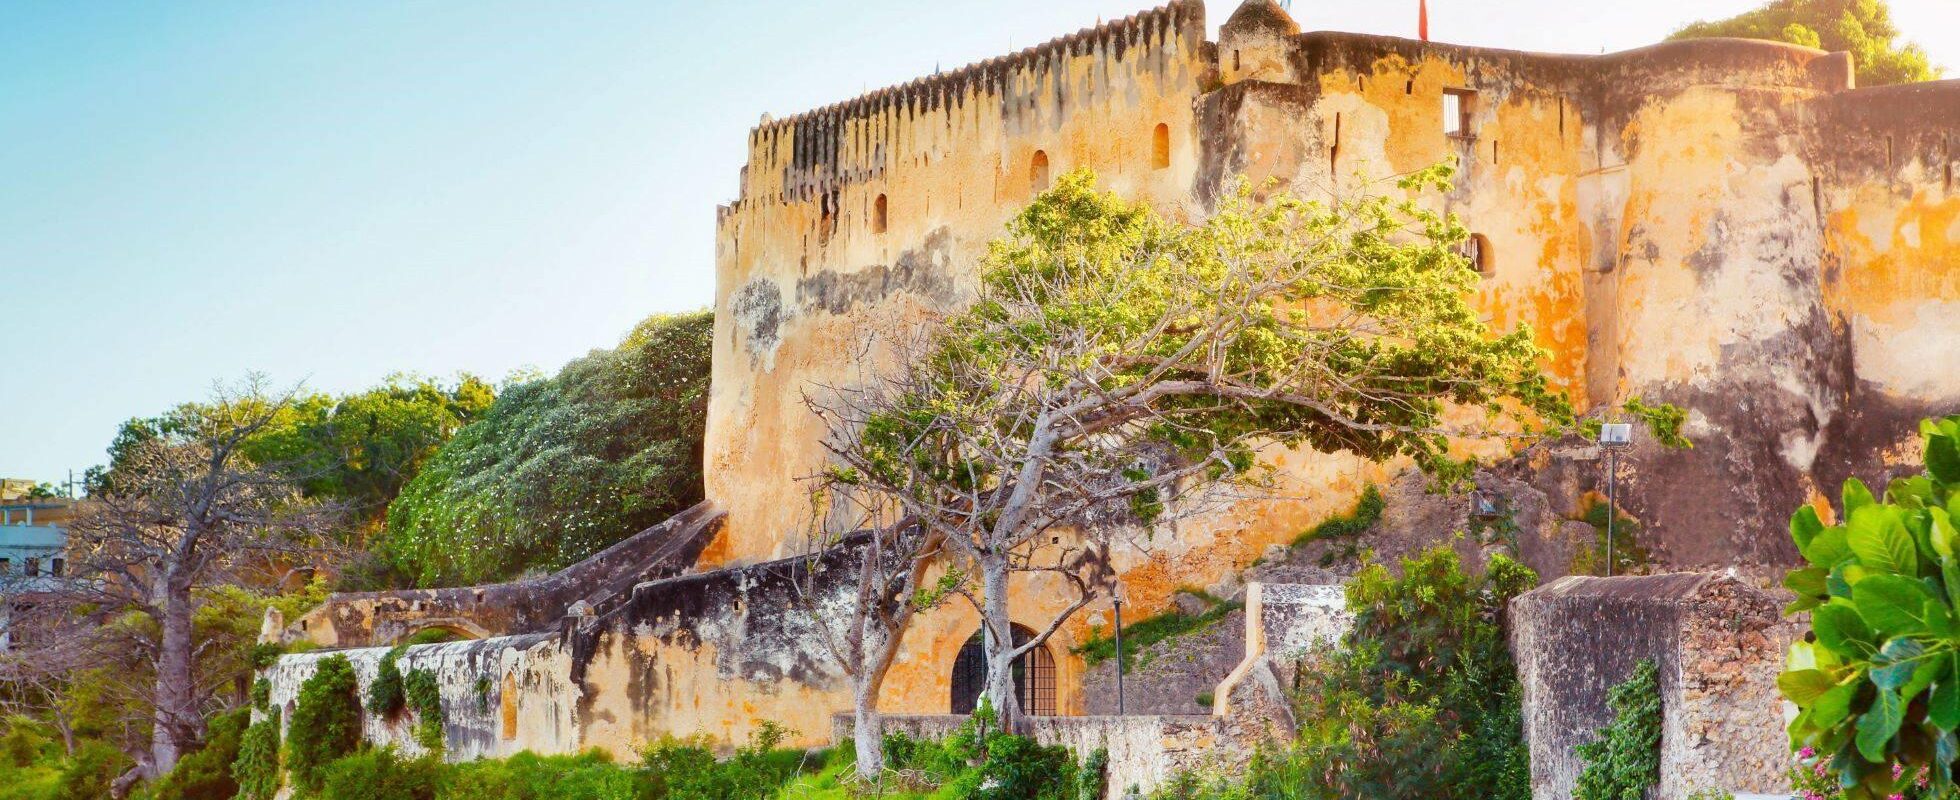 Fort Jesus in Mombasa old town with green trees